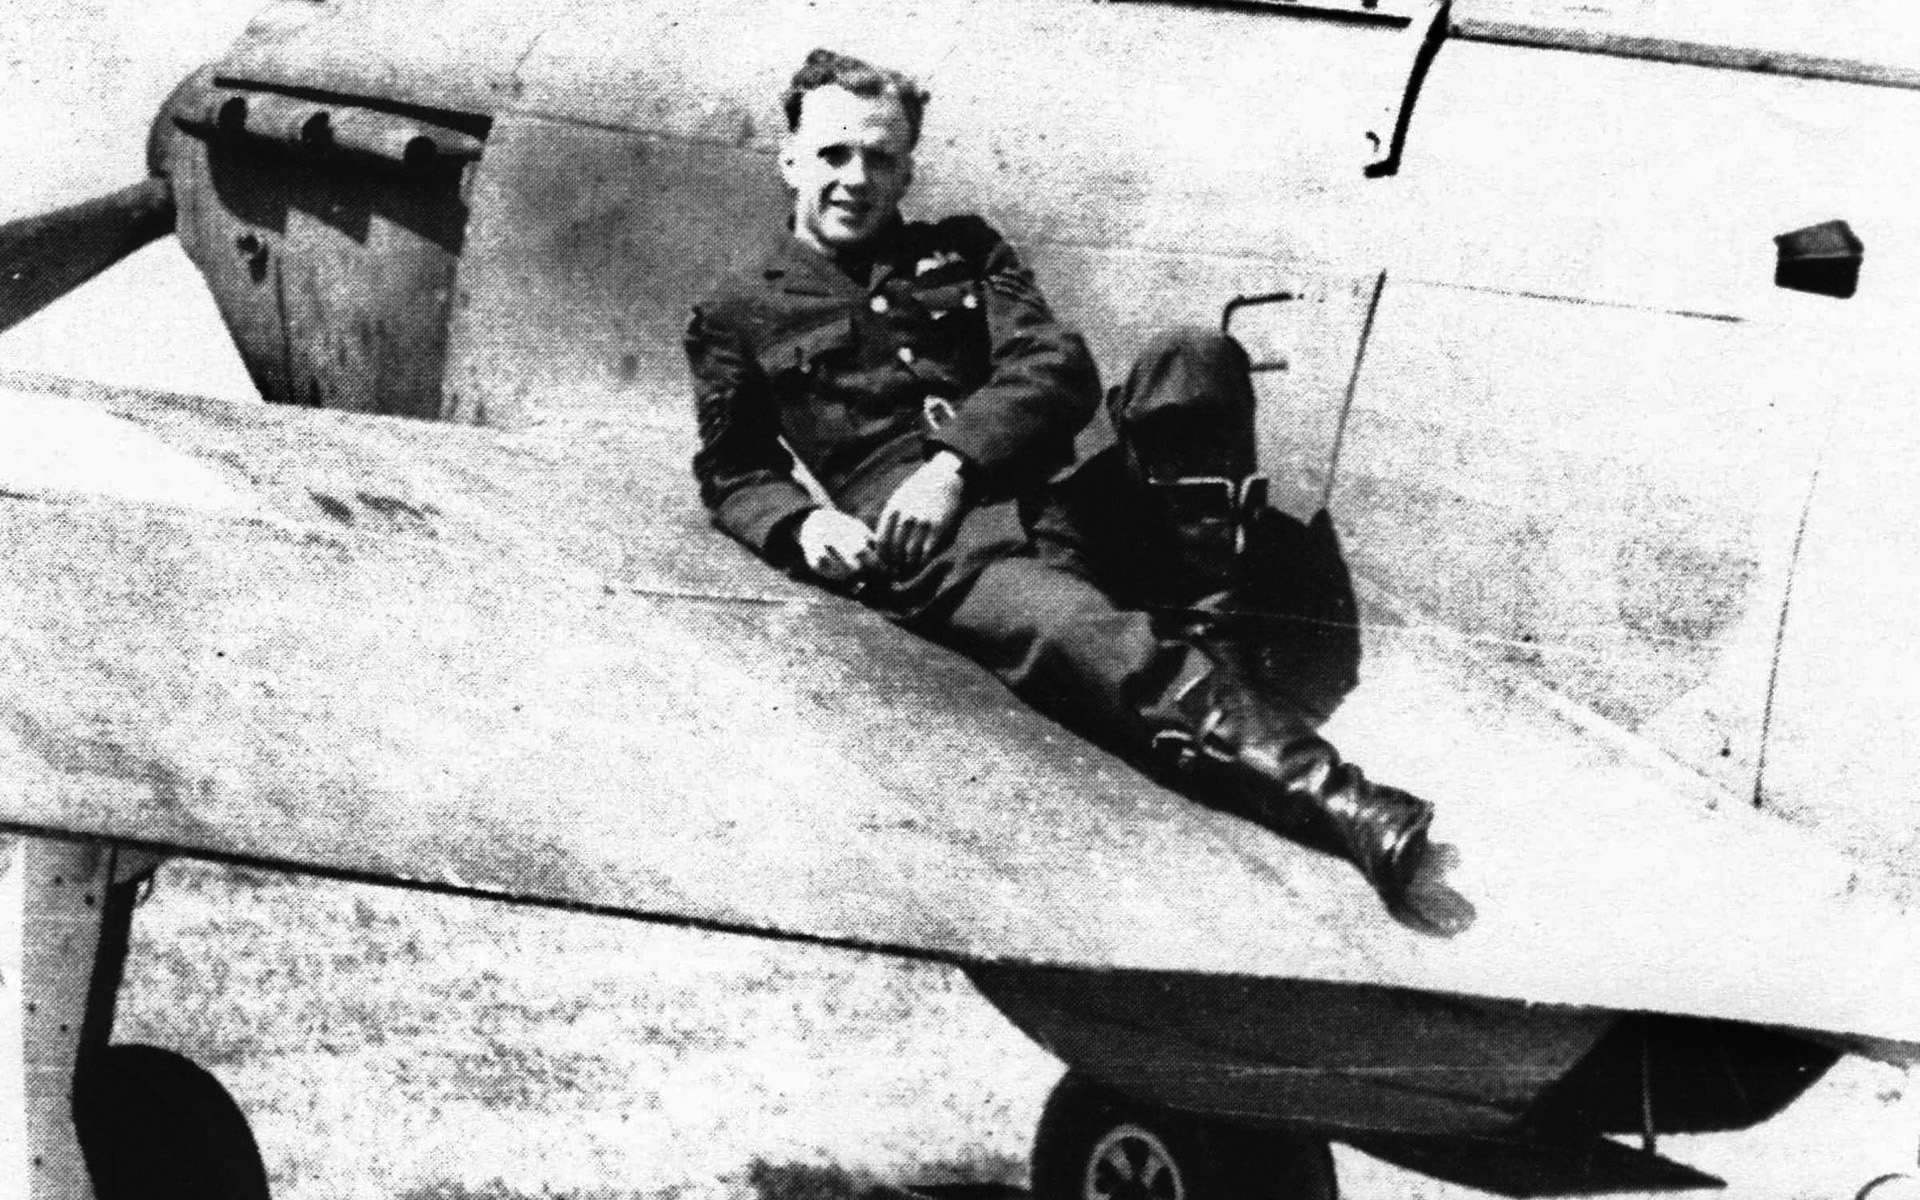 504 Squadron’s Sergeant Ray Holmes shot down a Dornier Do-17 that may have bombed Buckingham Palace. Seconds later, Holmes had to bail out of his damaged Hurricane.